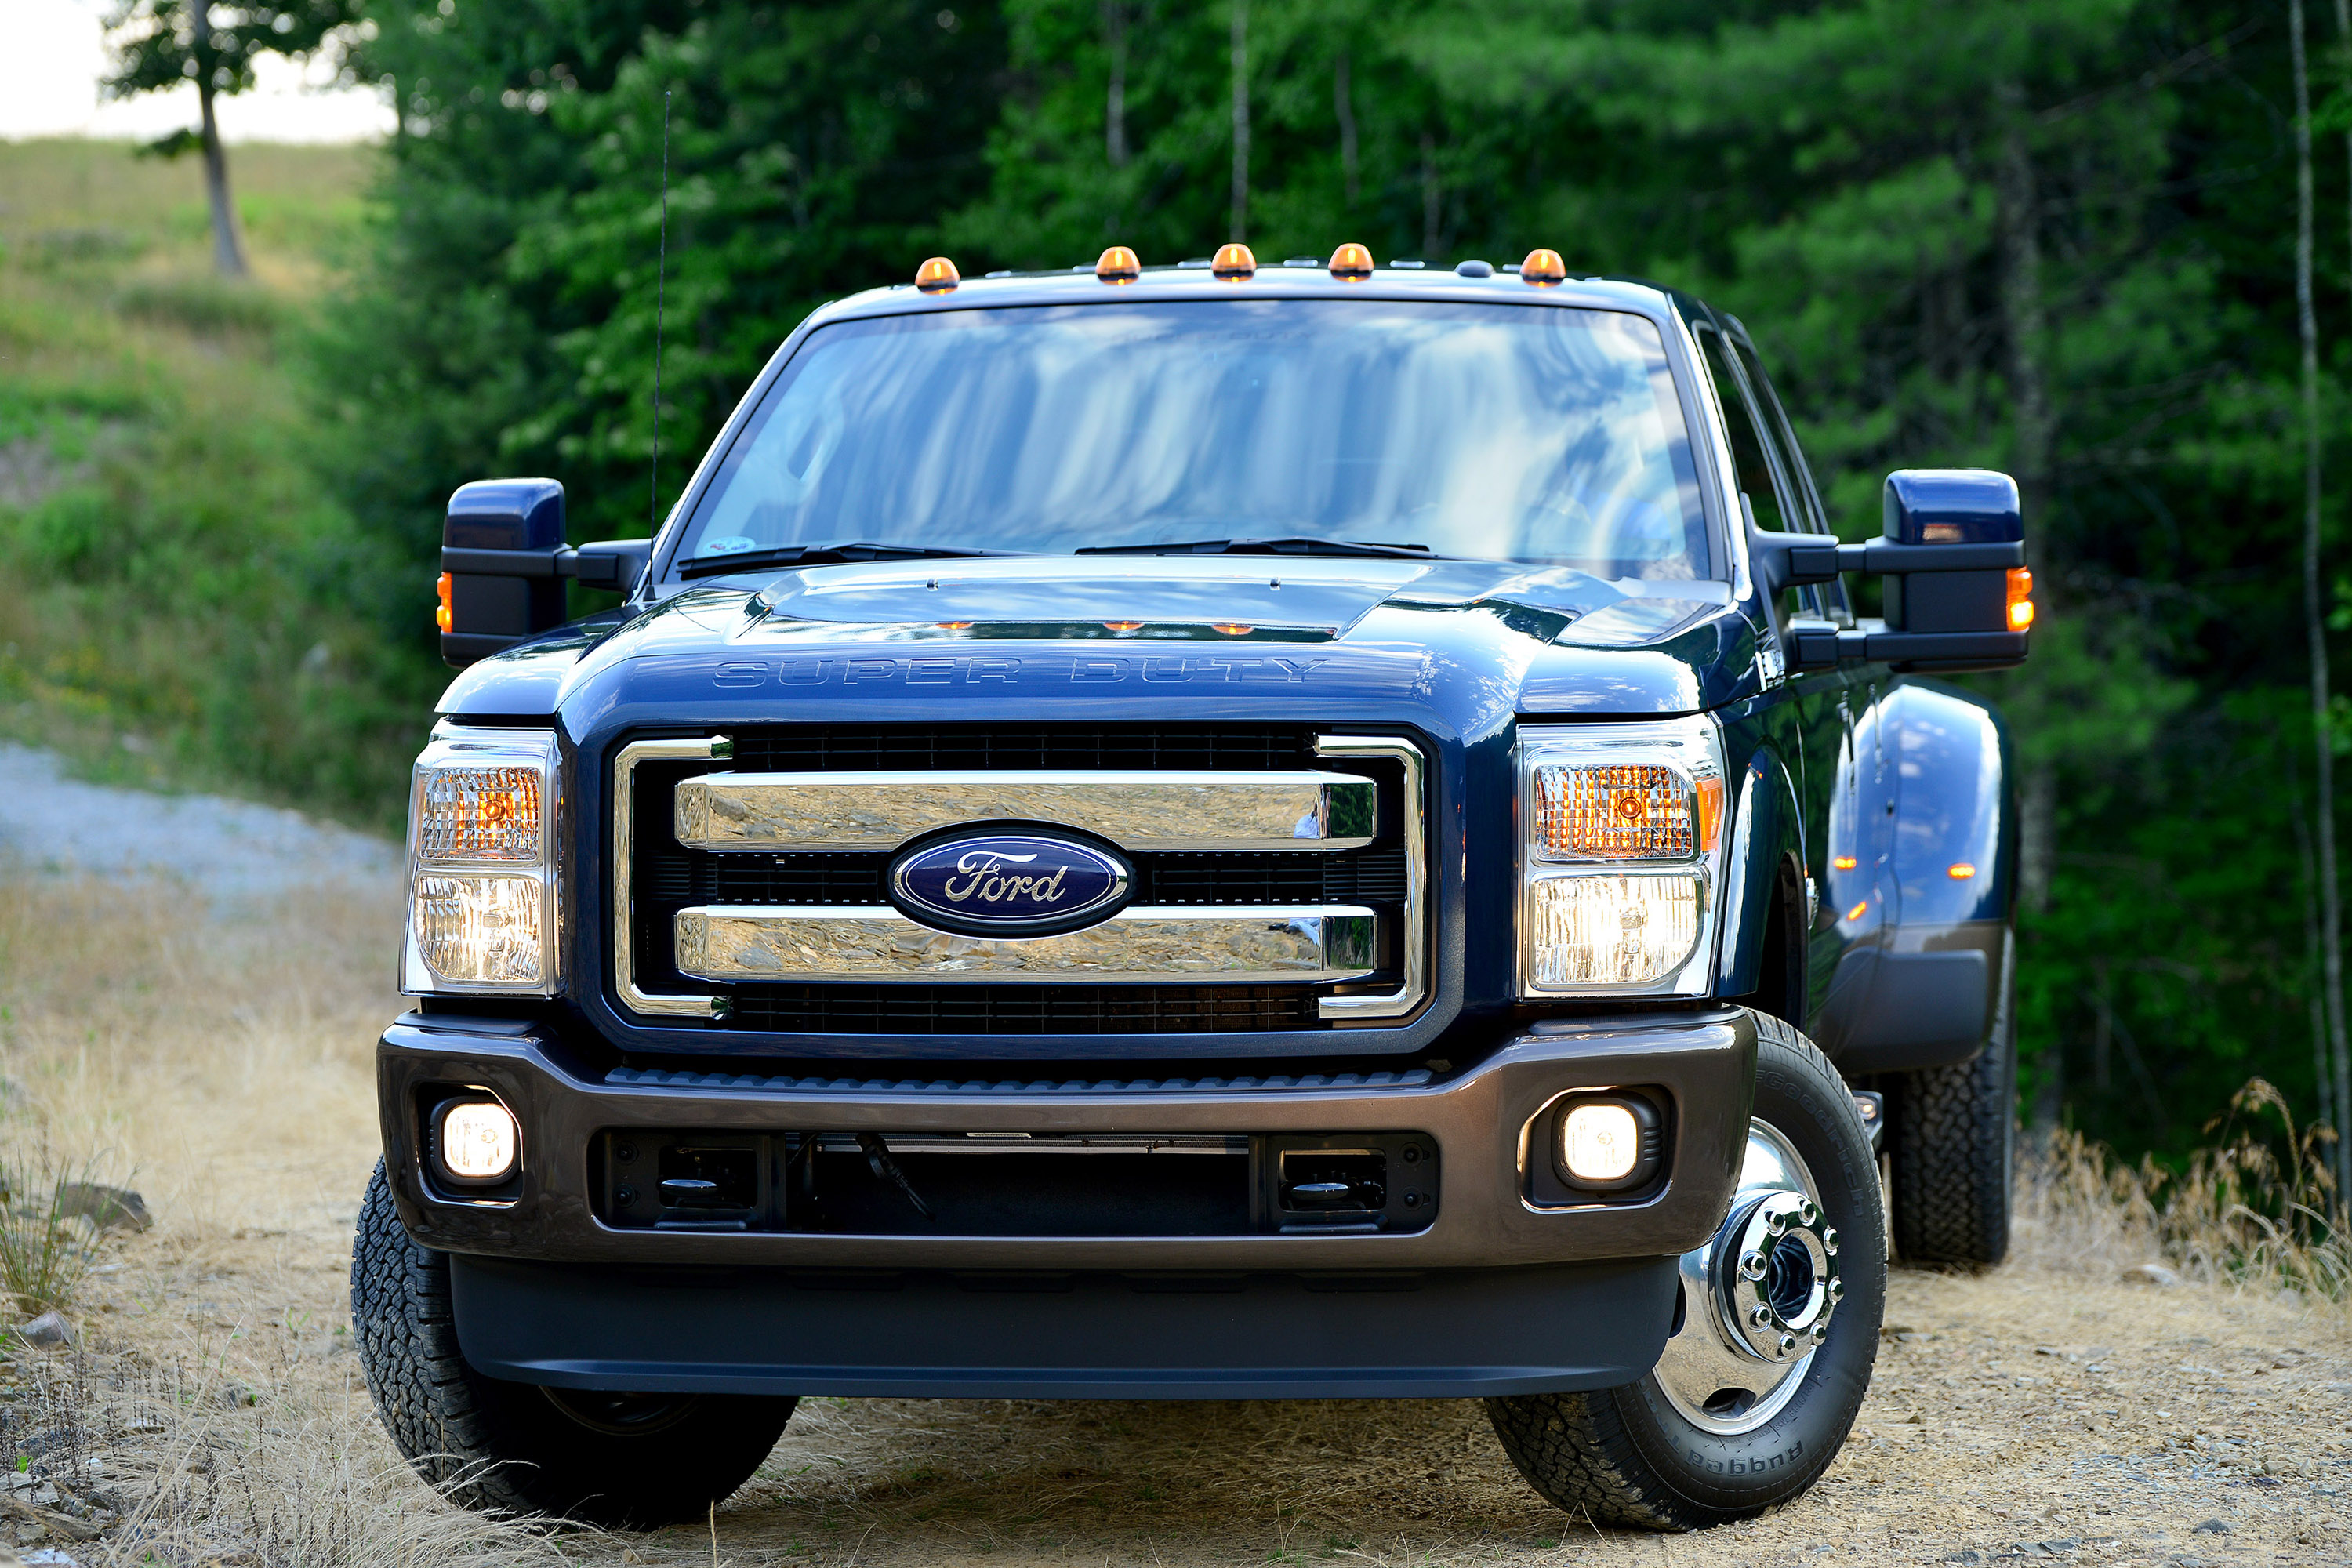 2015 Ford Super Duty Hd Pictures